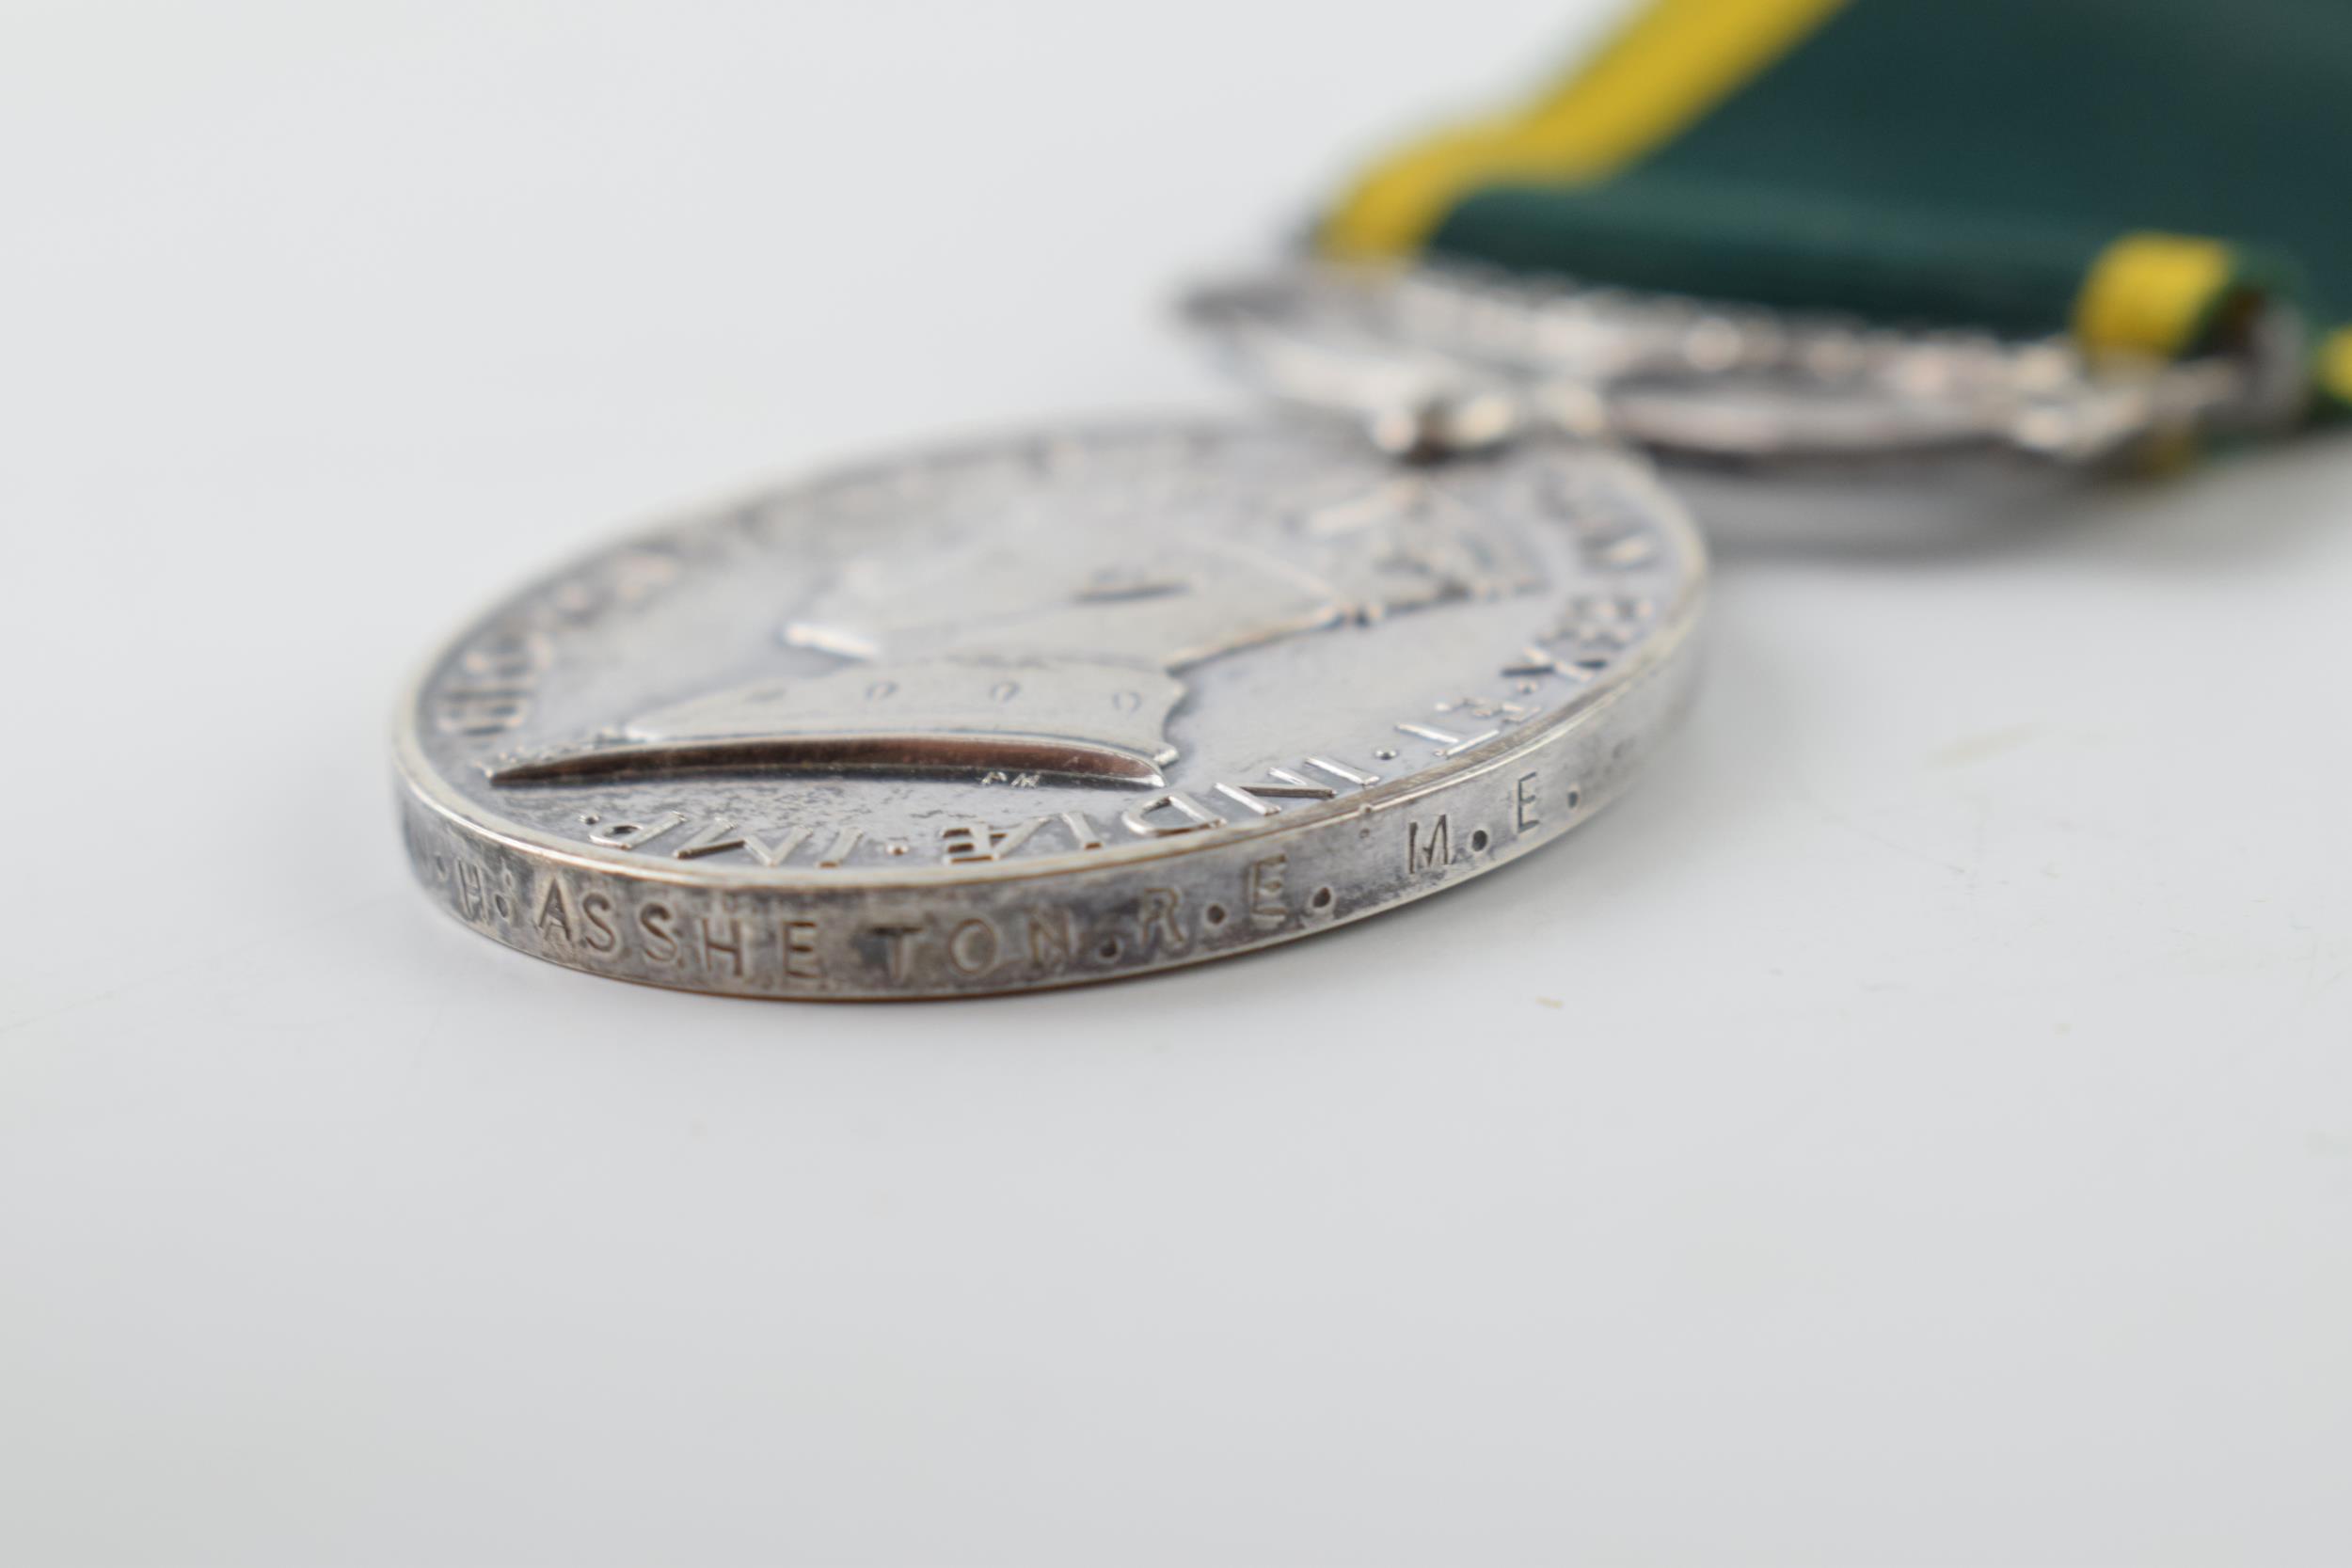 George VI Territorial medal 'For Efficient Service" awarded to 753760 CRMN. H . ASSHETON. R. E. M. - Image 5 of 5